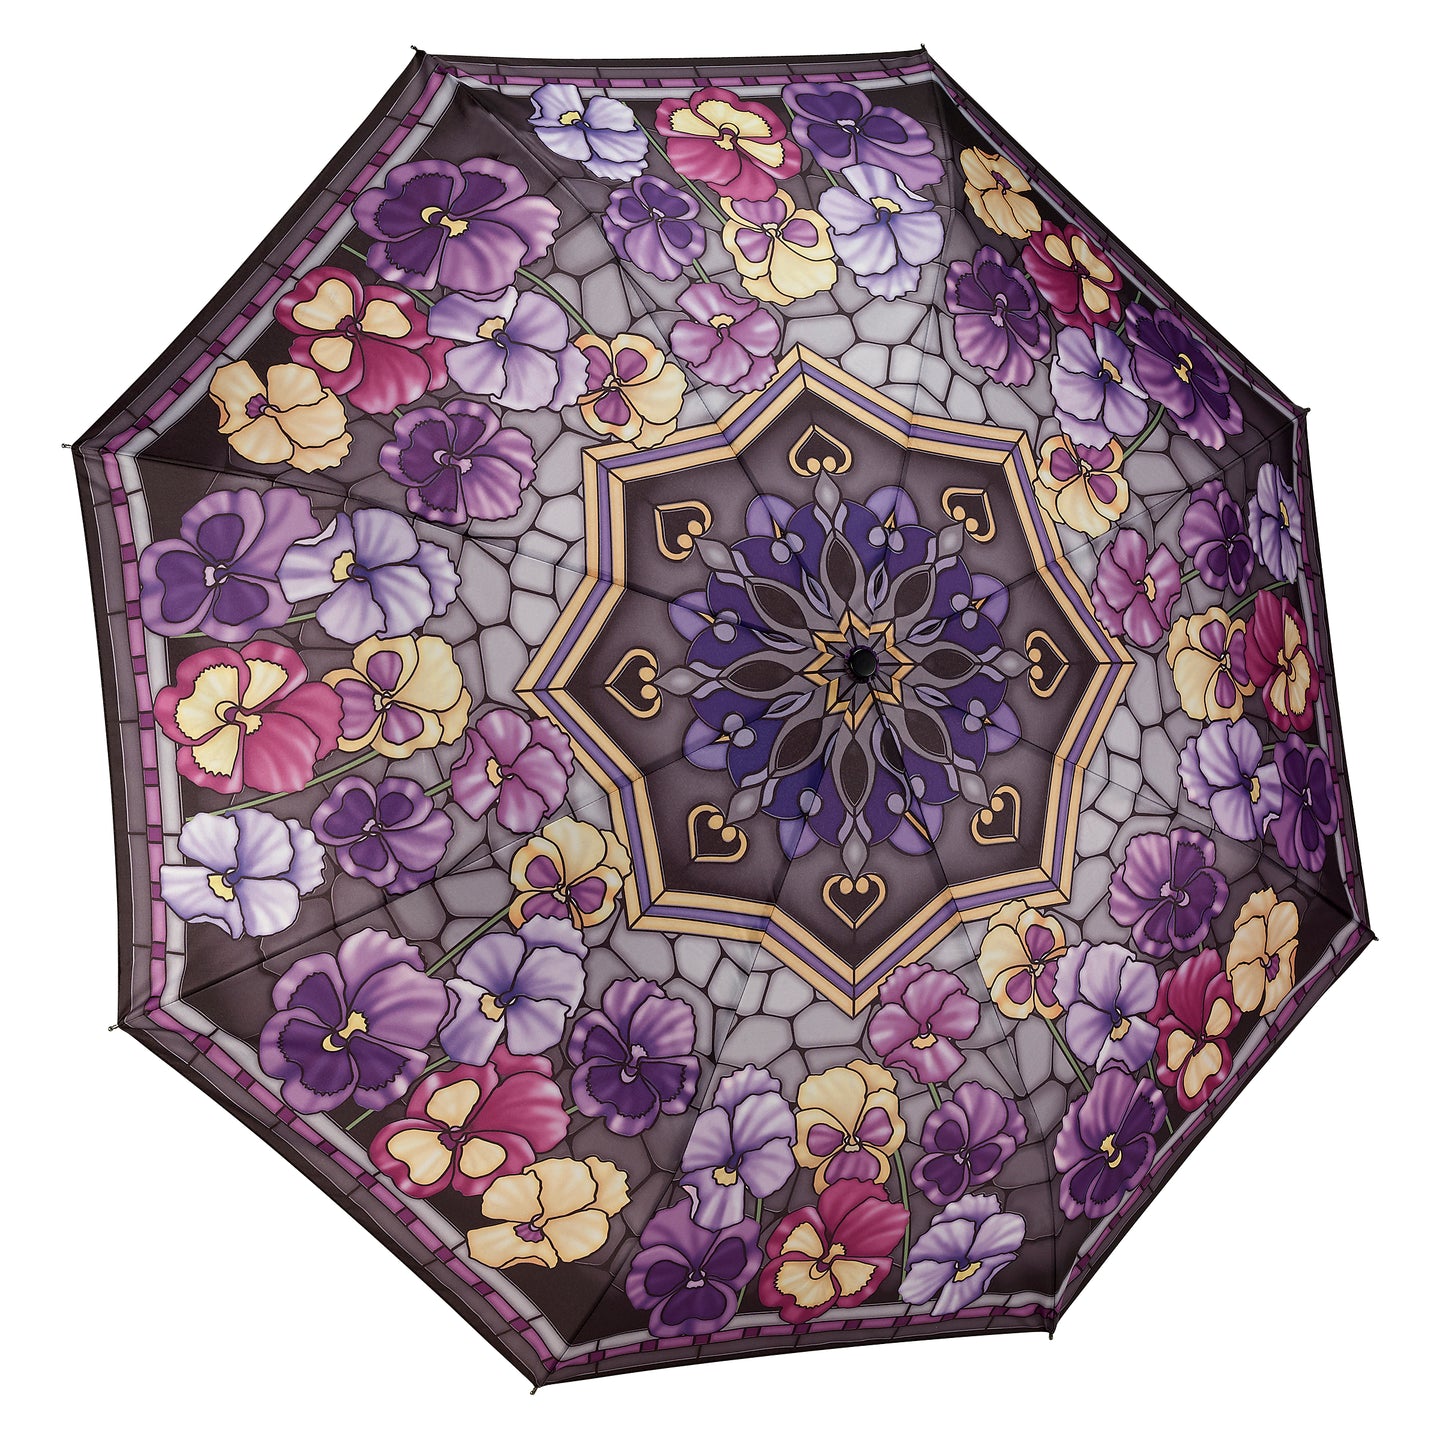 Stained Glass Pansies Umbrella